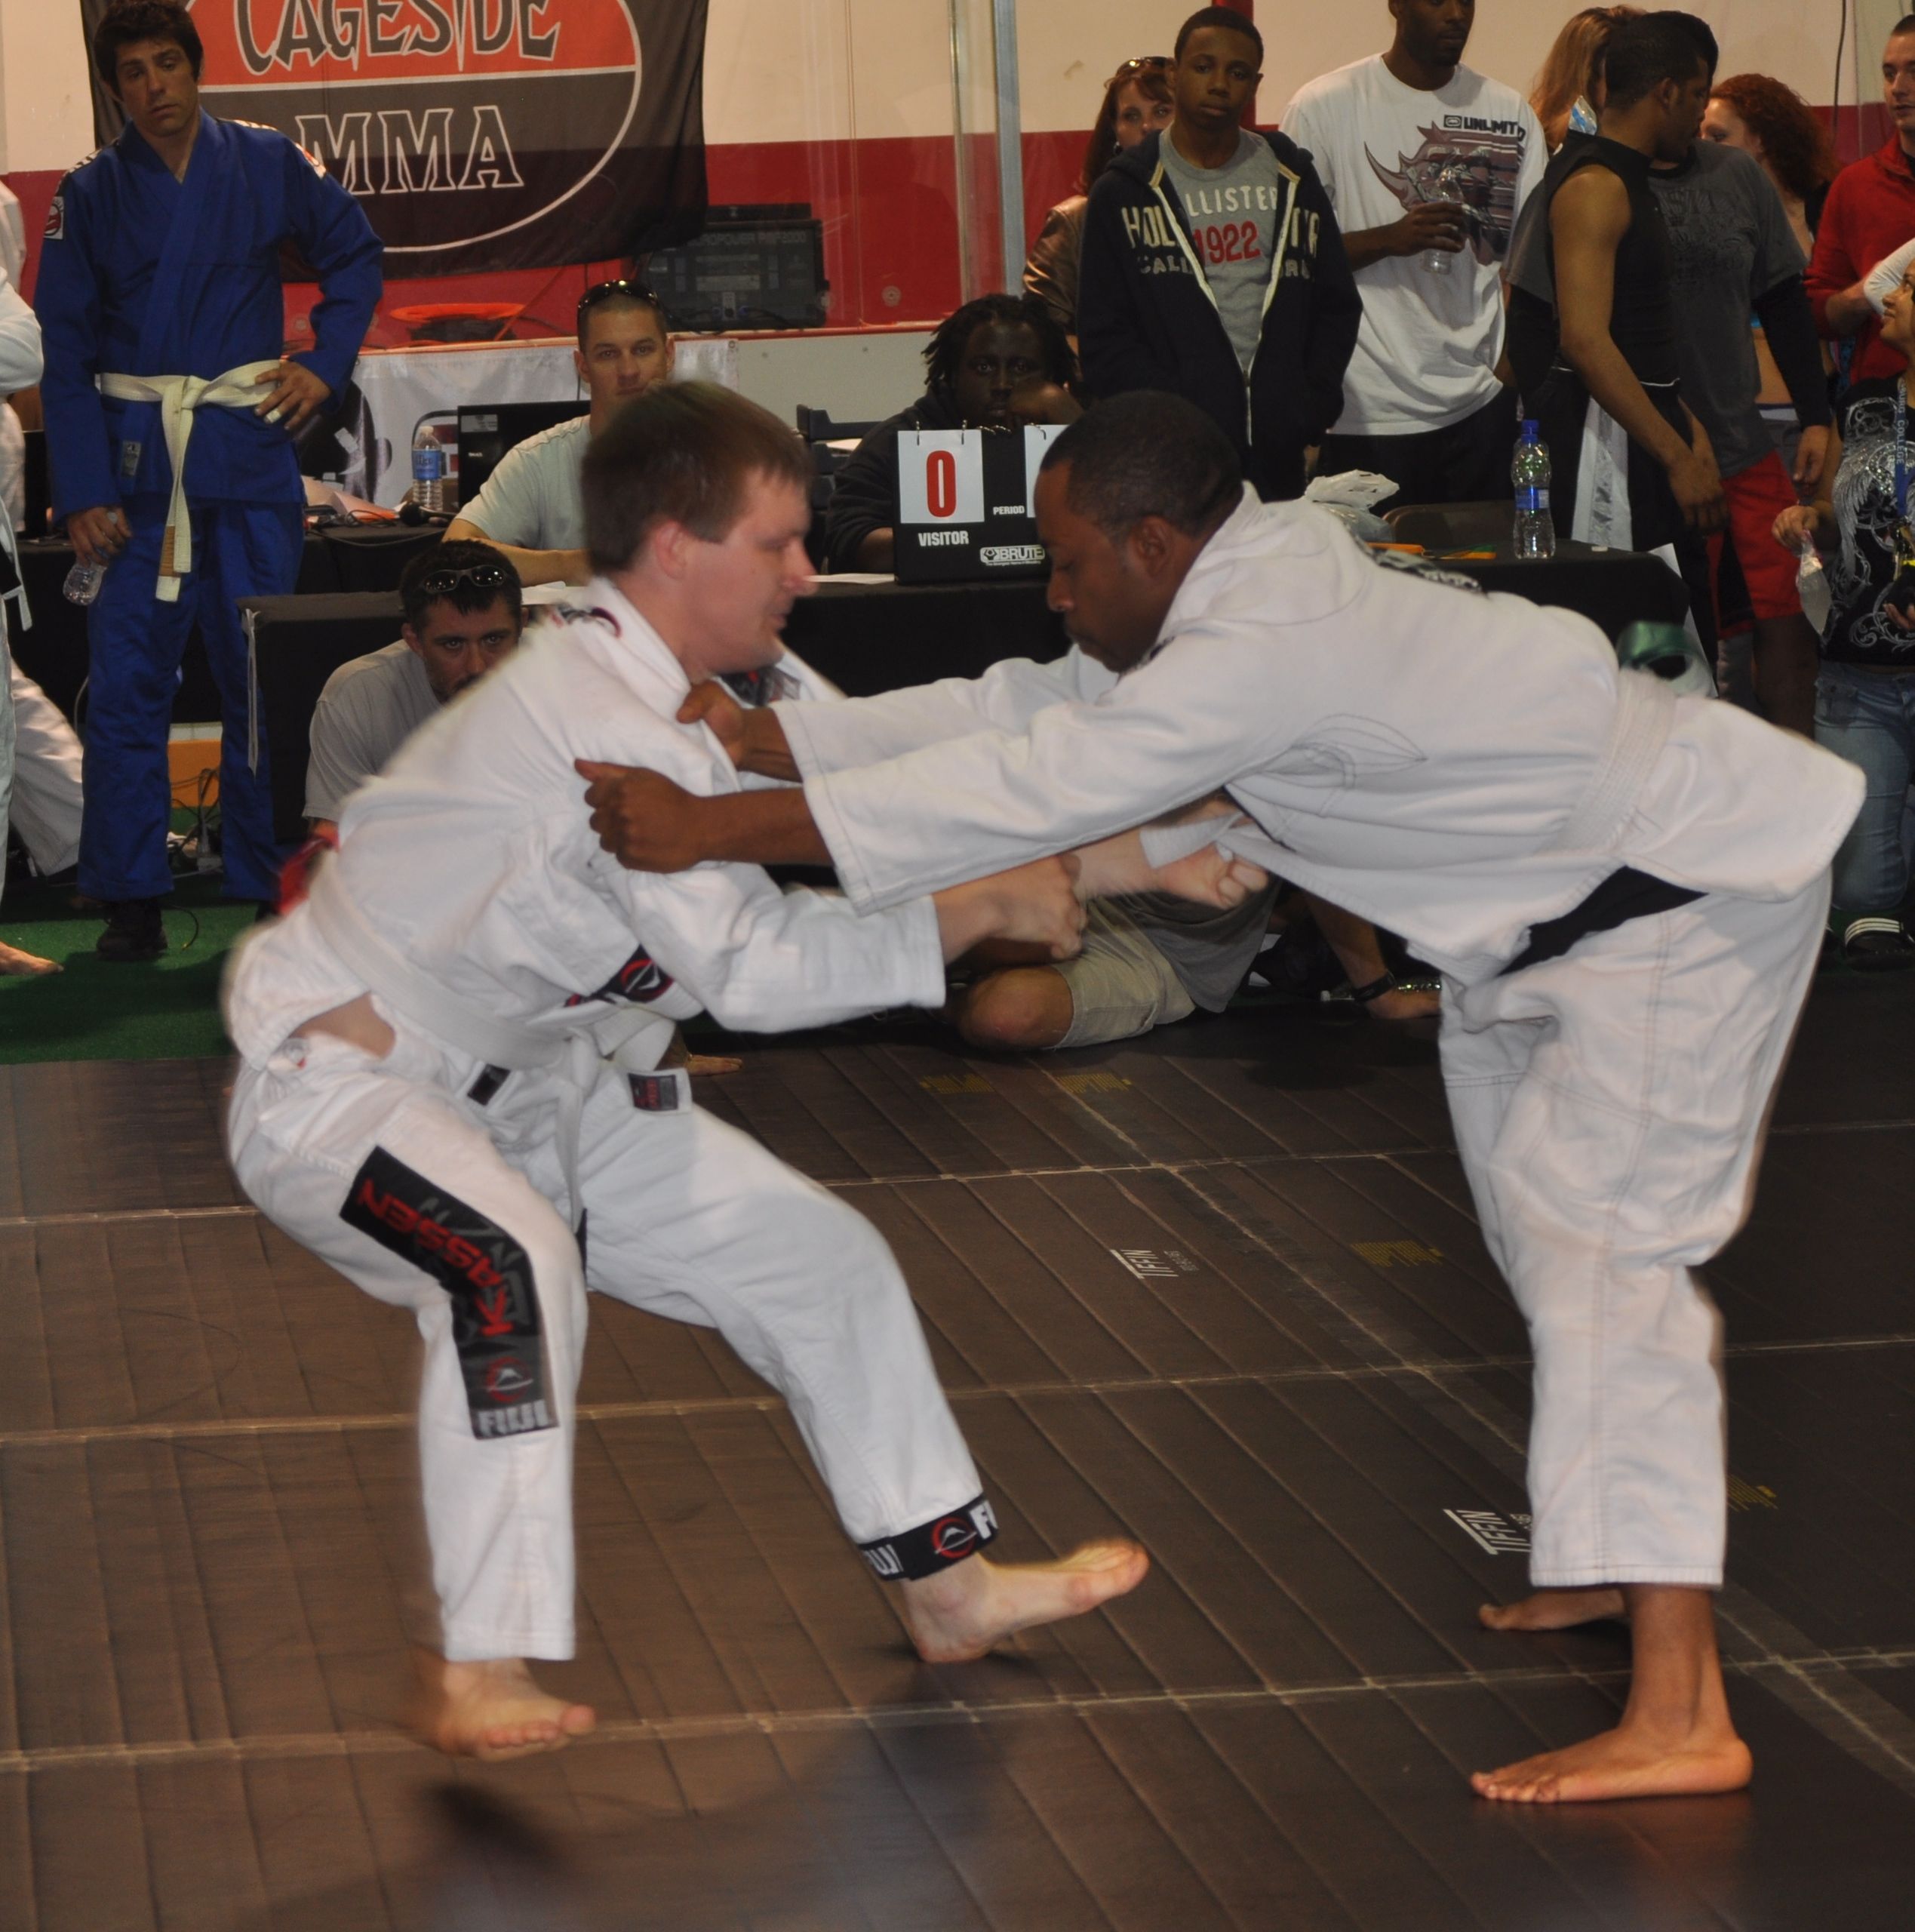 Danger: No Stripe White Belt Trying To Pull Guard